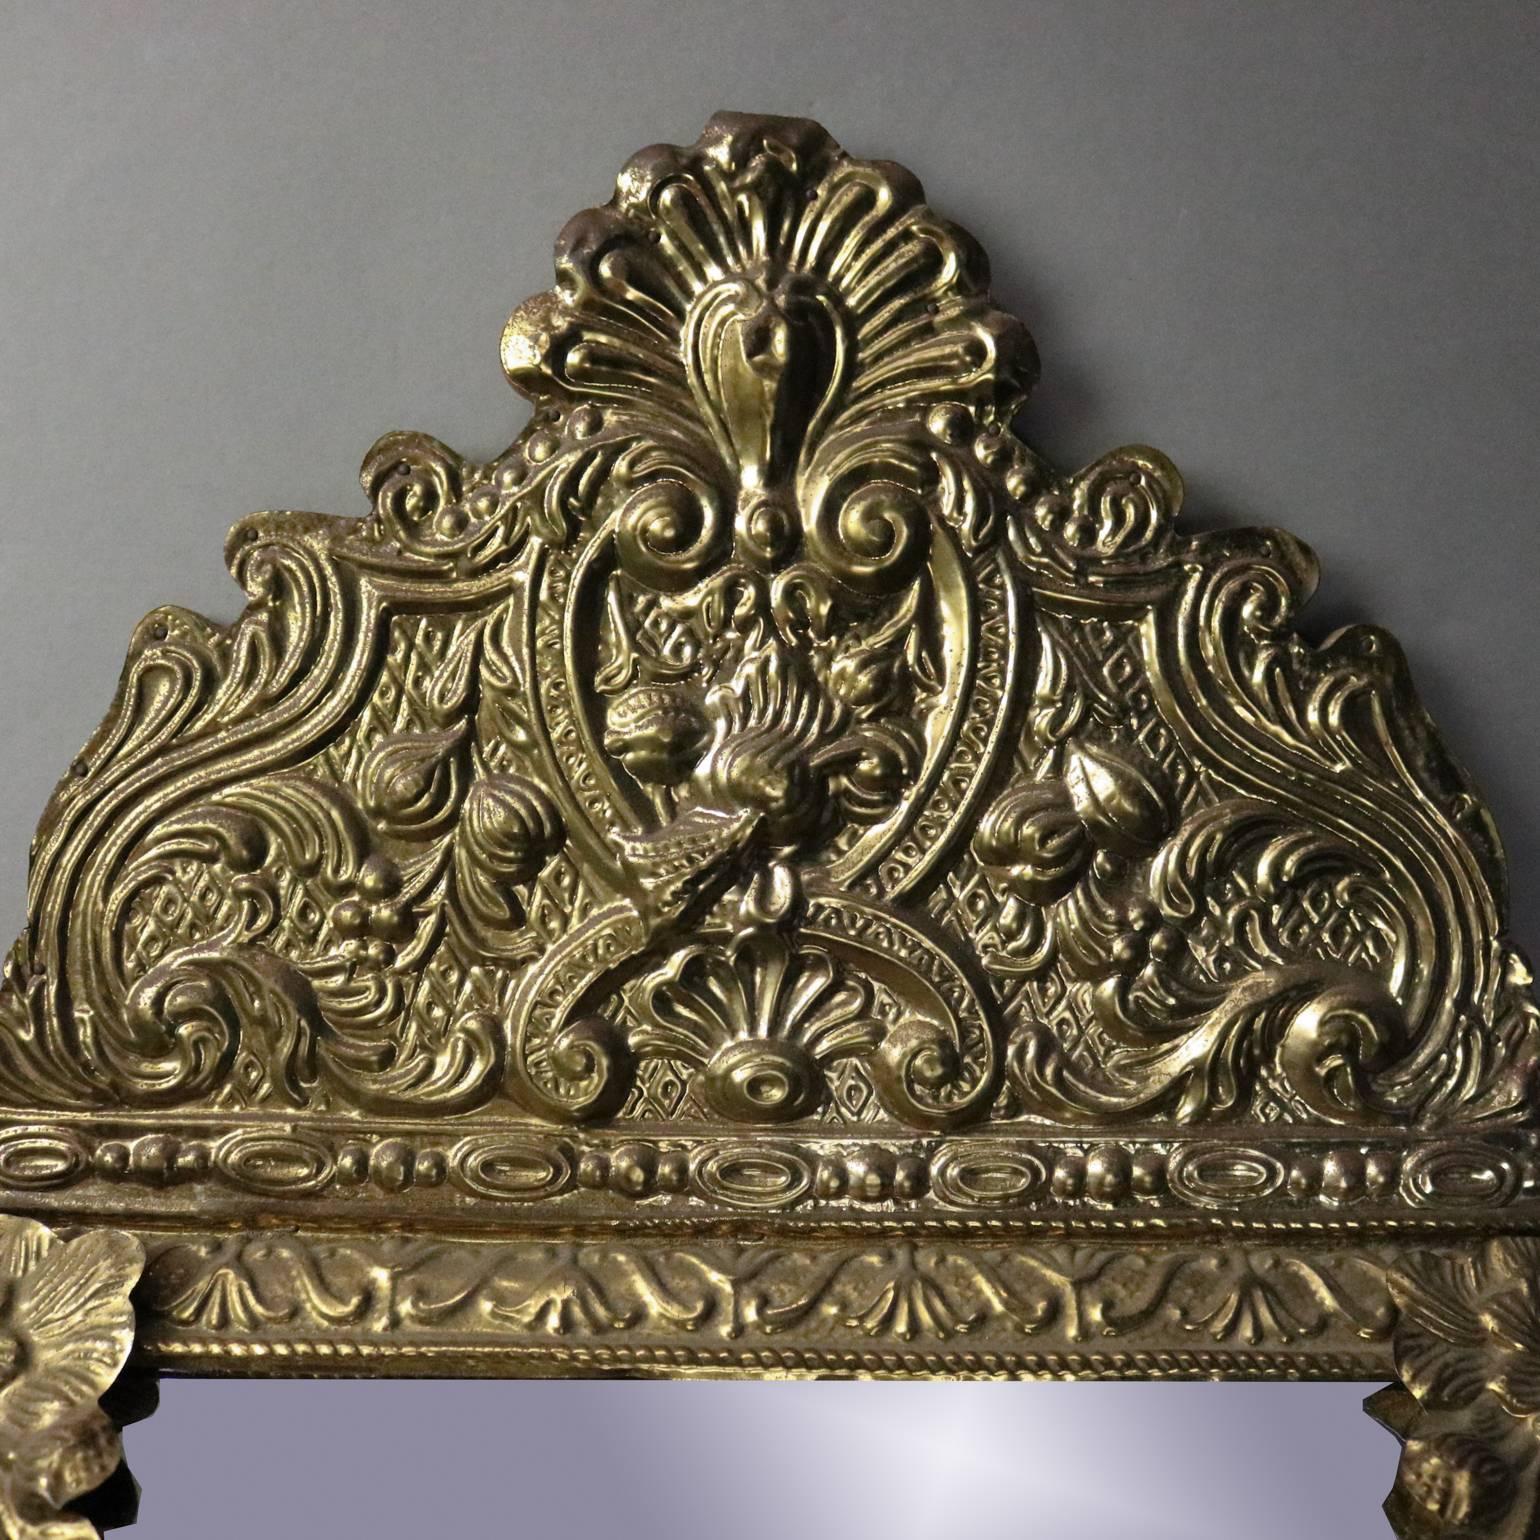 Antique French Baroque style wall cabinet features bronze construction with elaborate floral and scroll decoration on the frame and crest, mirrored door opens to reveal interior cabinet with hooks, circa 1920

Measures: 24” H x 13.5” W x 2.25” D